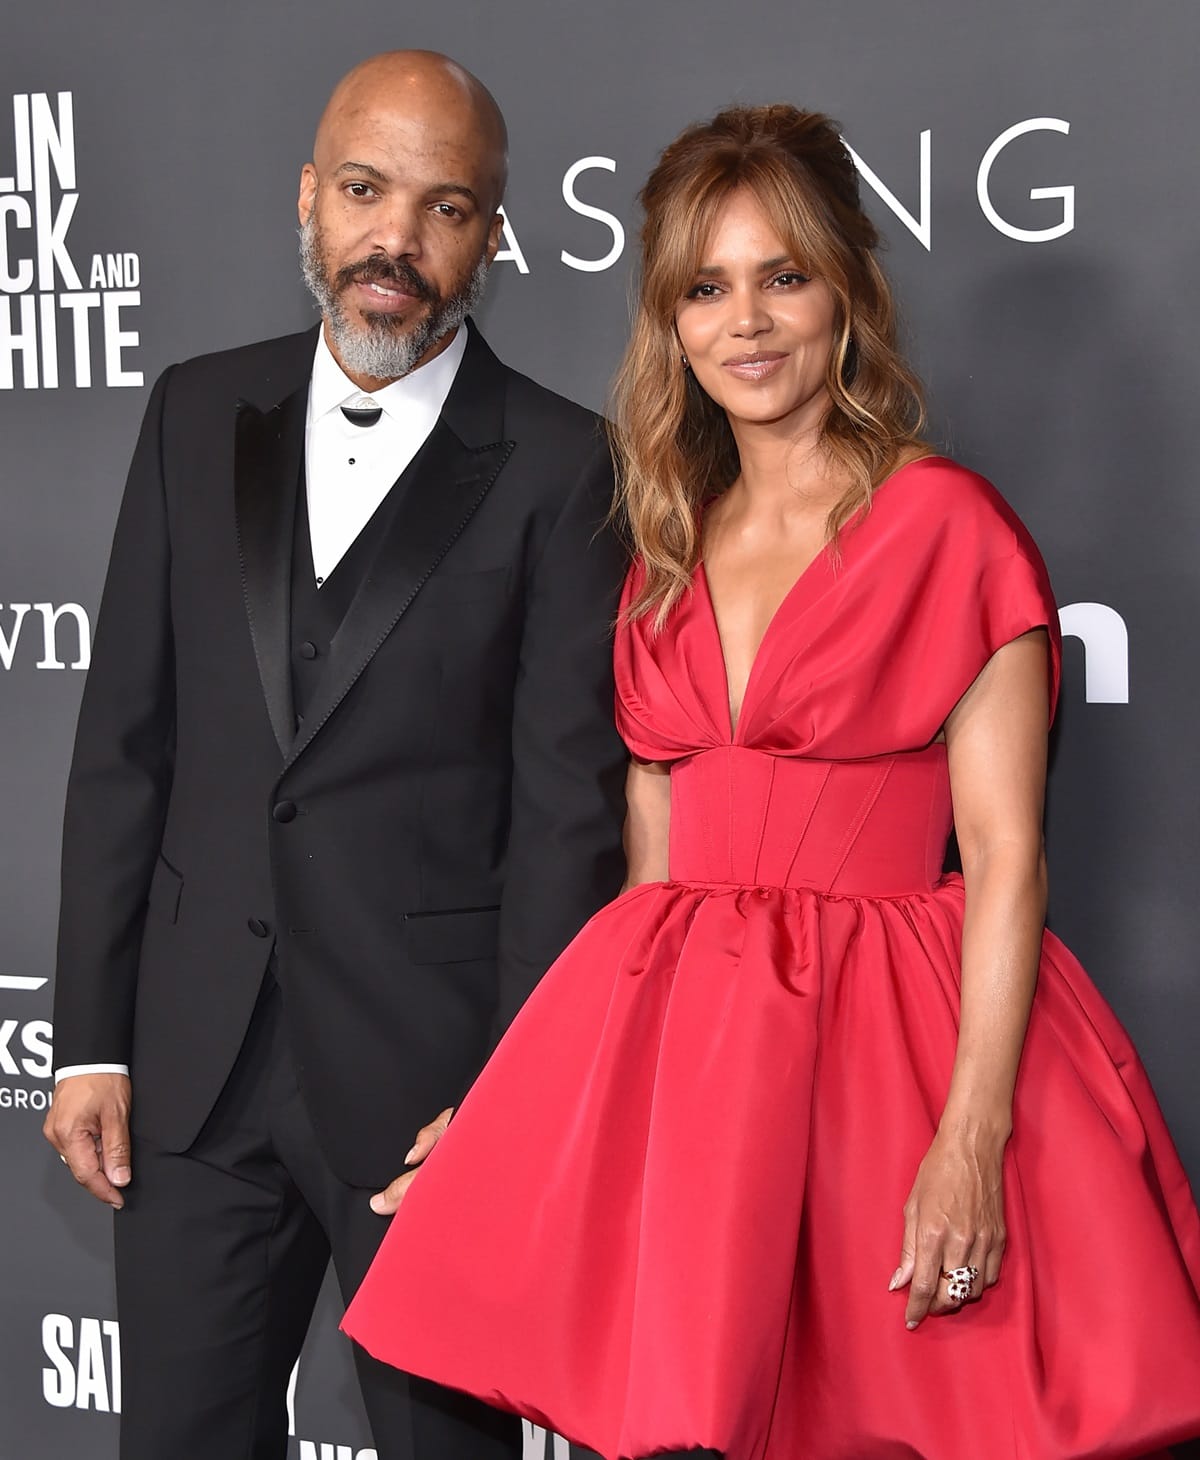 Van Hunt and Halle Berry confirmed their relationship in September 2020, and she has been married three times before, to baseball player David Justice, singer-songwriter Eric Benét, and actor Olivier Martinez